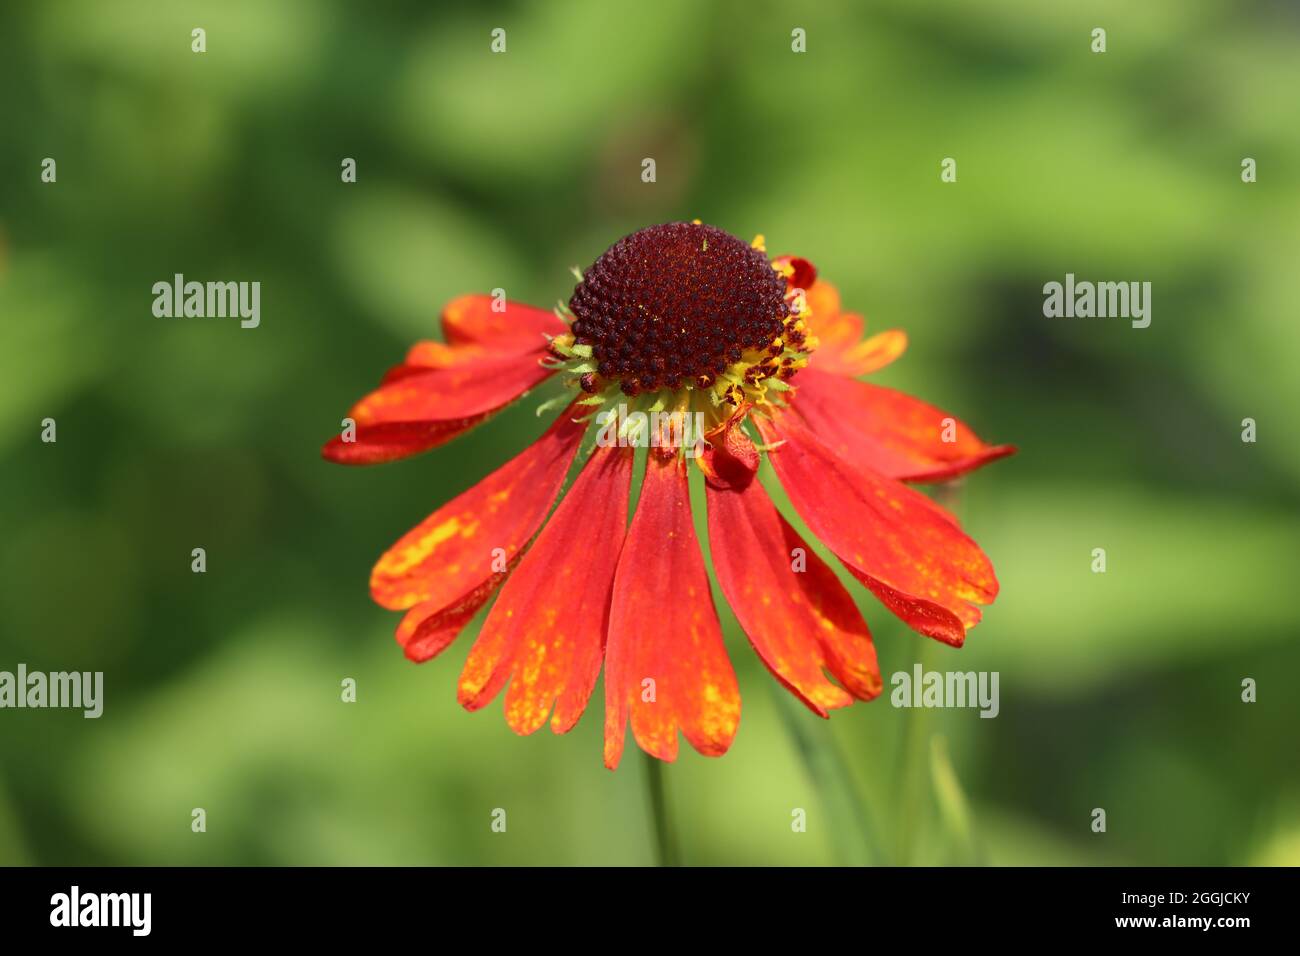 a beautiful orange-red coneflower bloom against a green natural blurry background Stock Photo